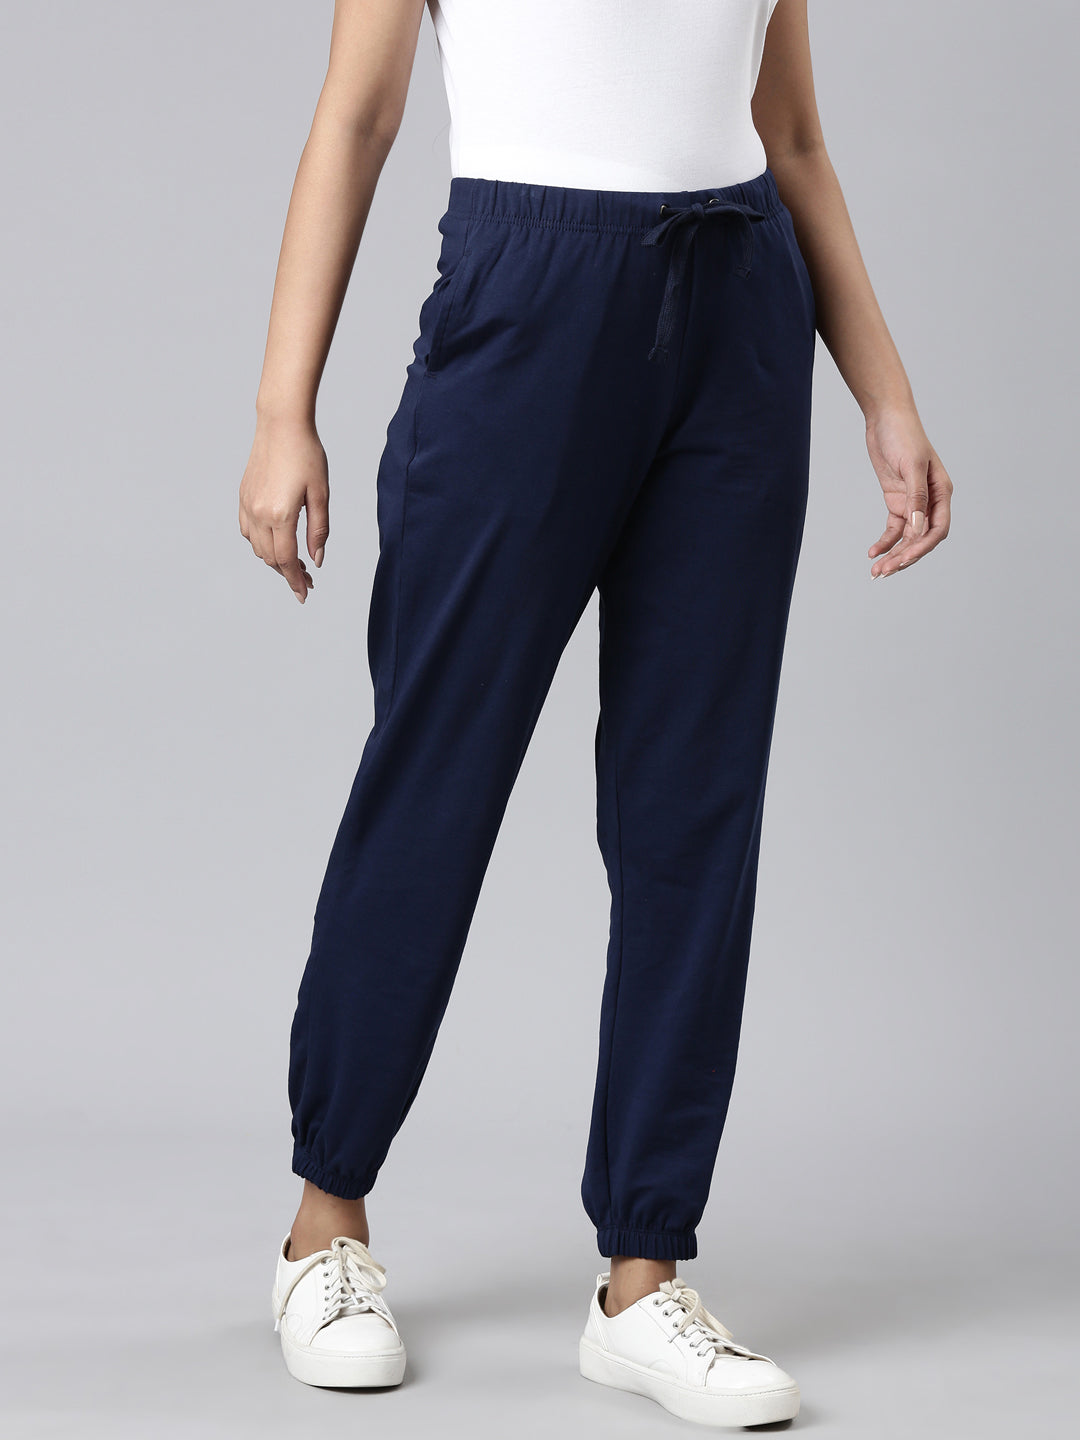 Women Solid Navy Mid Rise Cotton Casual Joggers